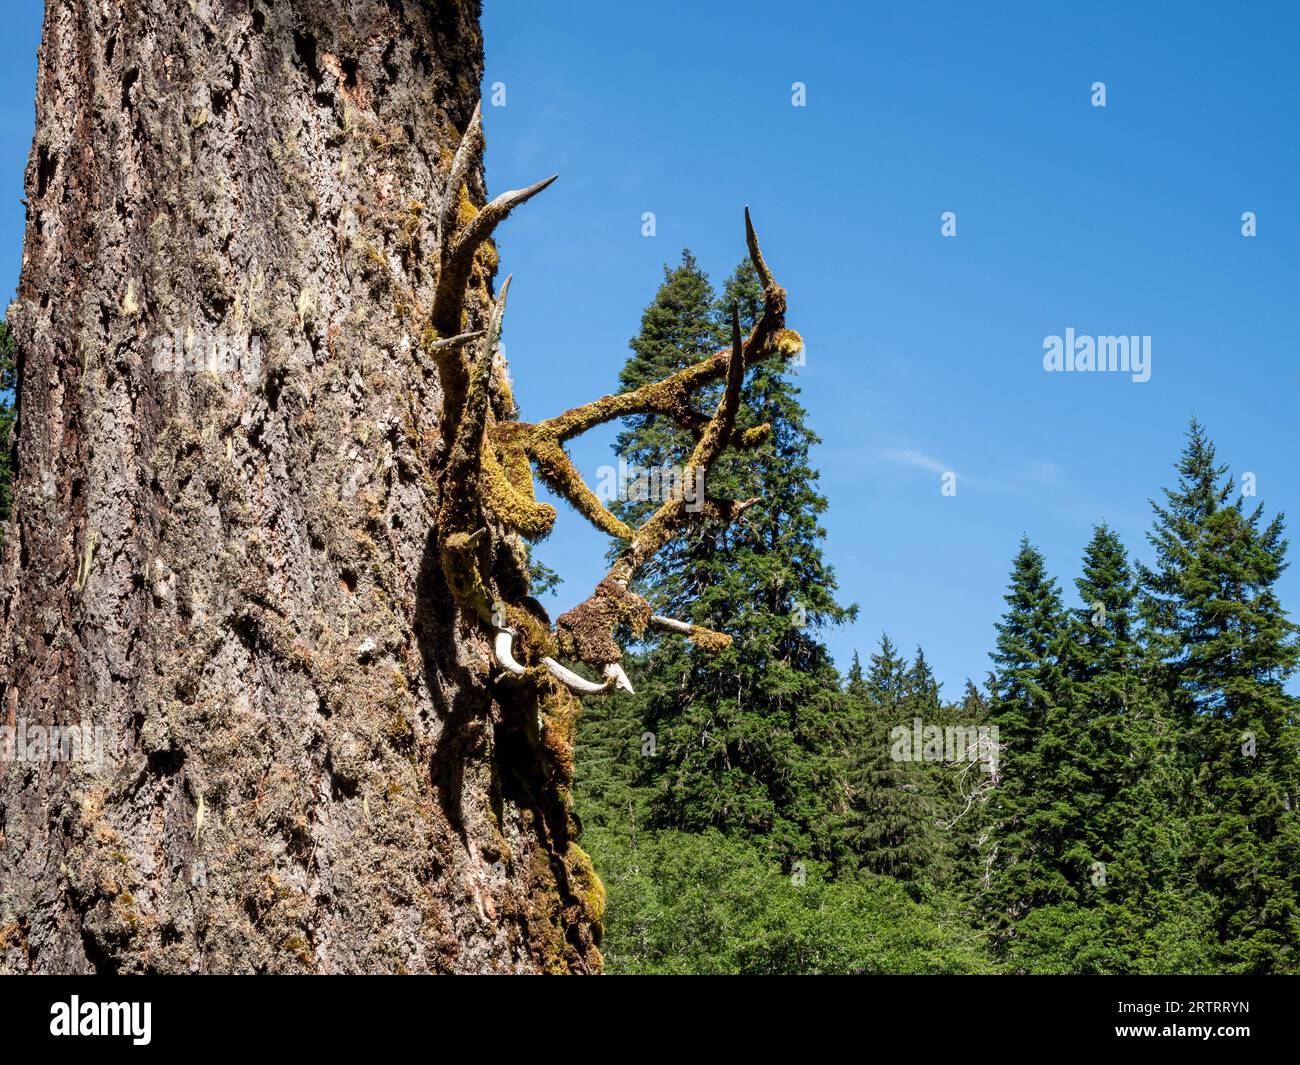 WA23655-00...WASHINGTON - Two sets of moss covered antlers attatched to a tree at Elkhorn backcountry camparea in the Elwha River Valley. Stock Photo